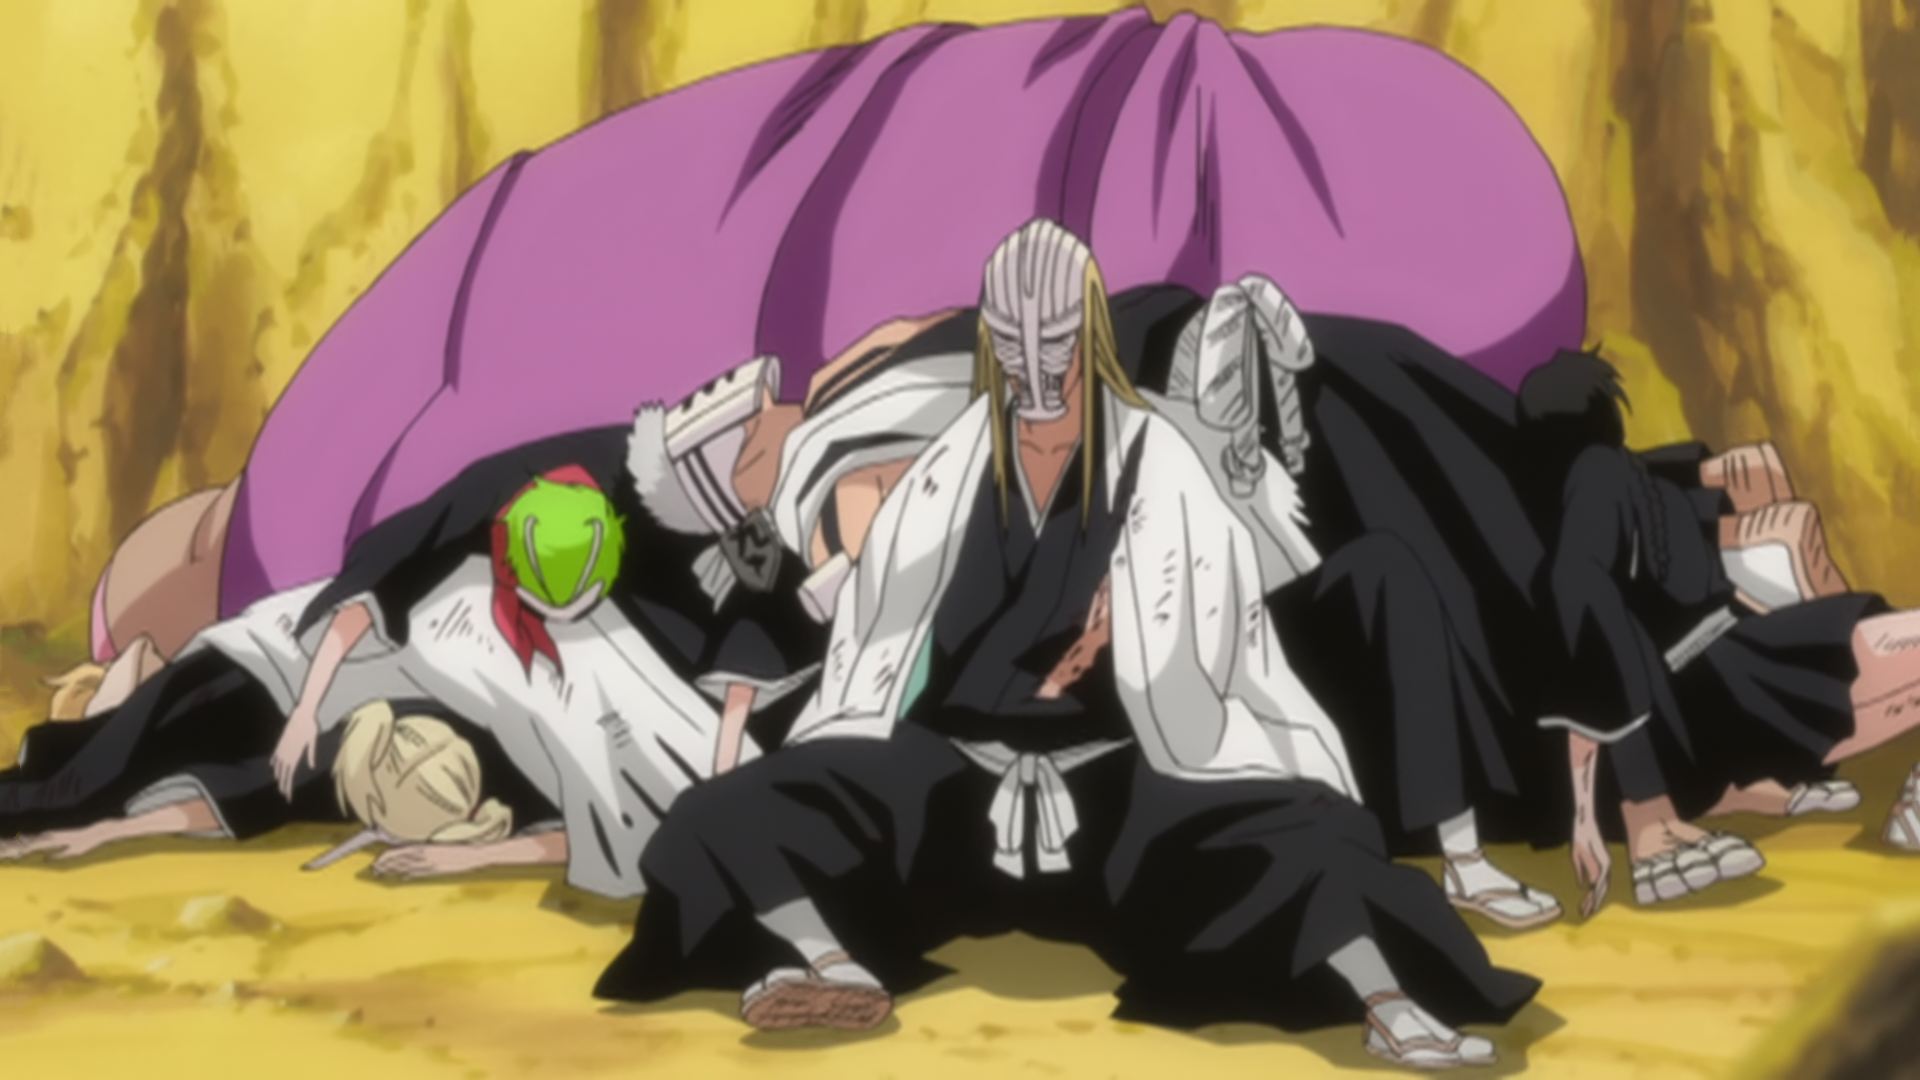 -http://images1.wikia.nocookie.net/__cb20110403213944/bleach/en/images/f/fd/Ep212VisoredGathered.png